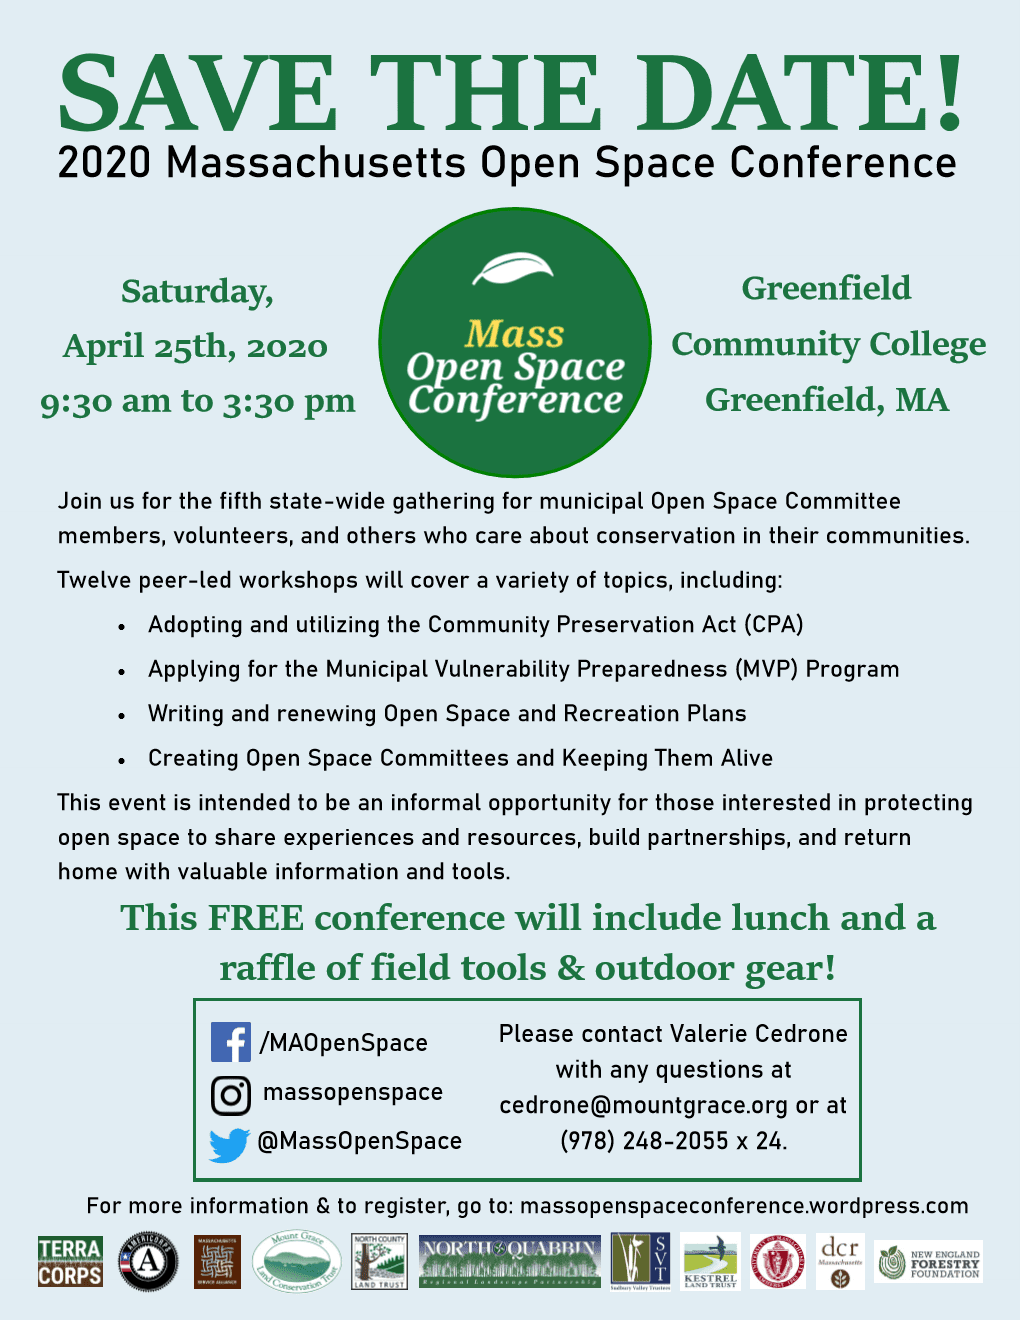 CANCELLED - 2020 Massachusetts Open Space Conference